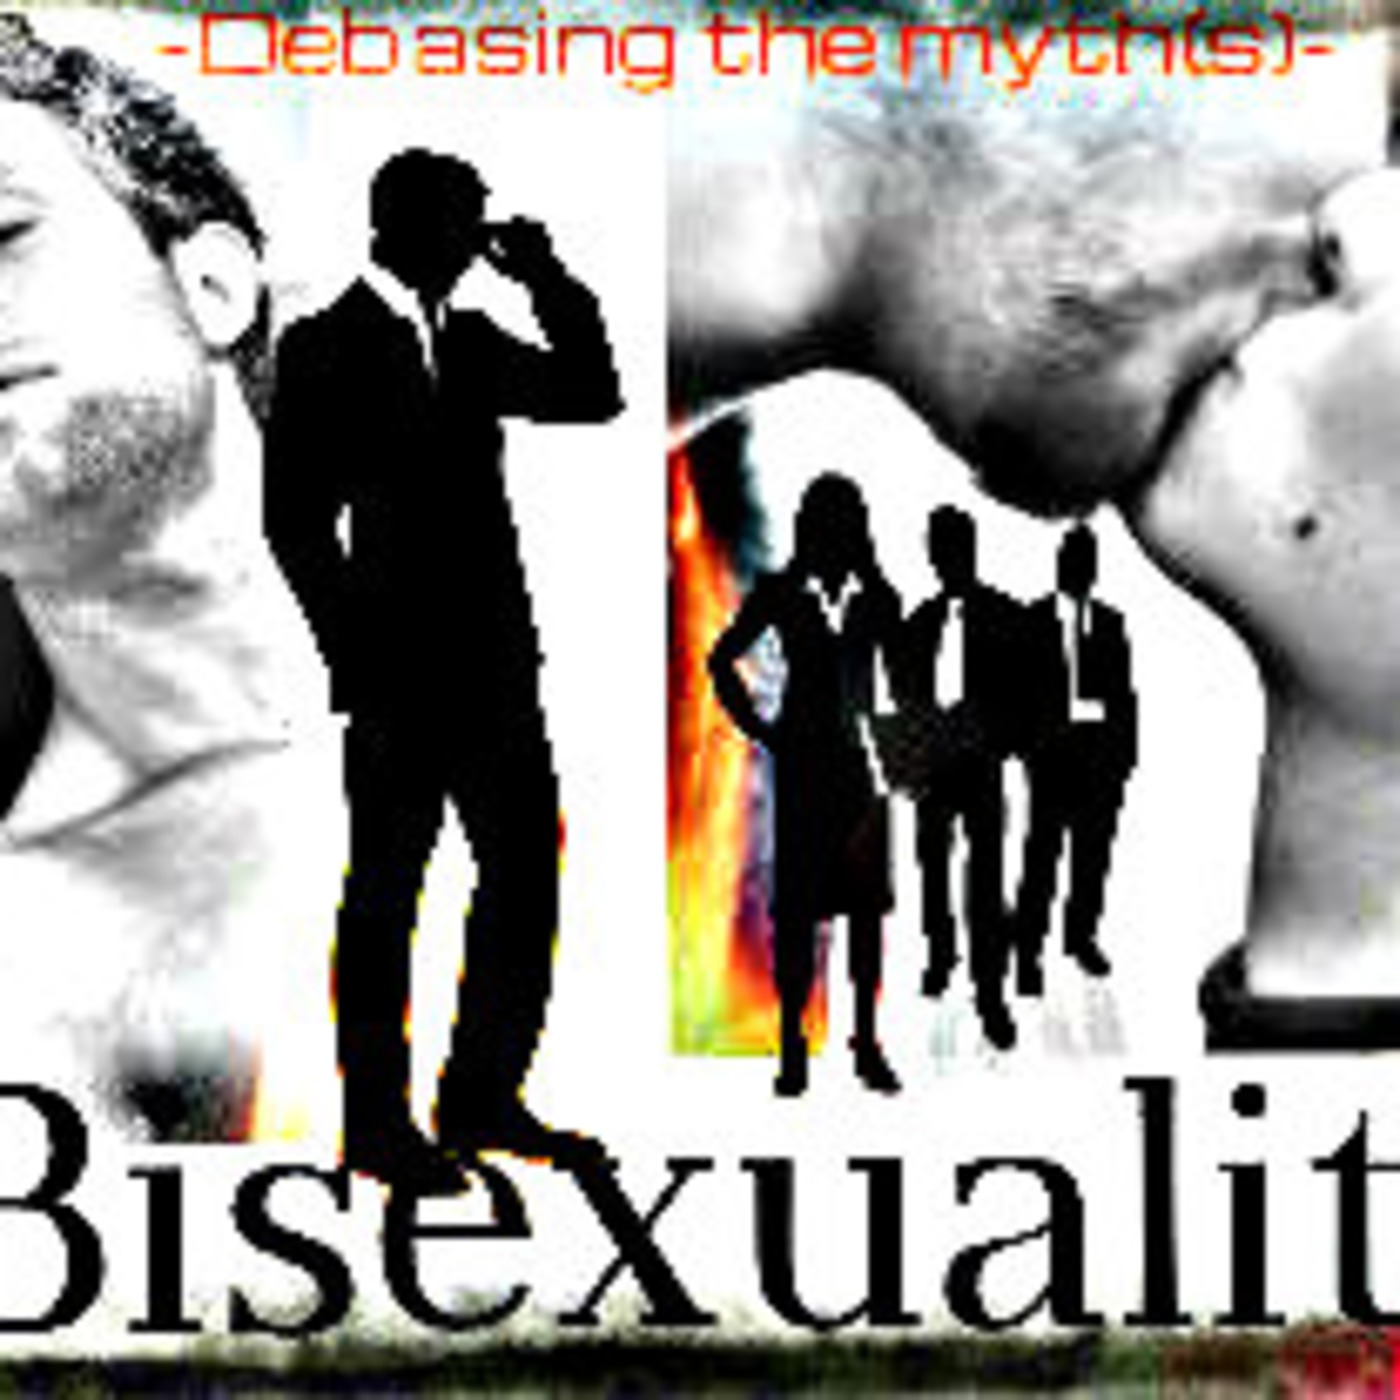 Bisexuality: A Cultural Taboo